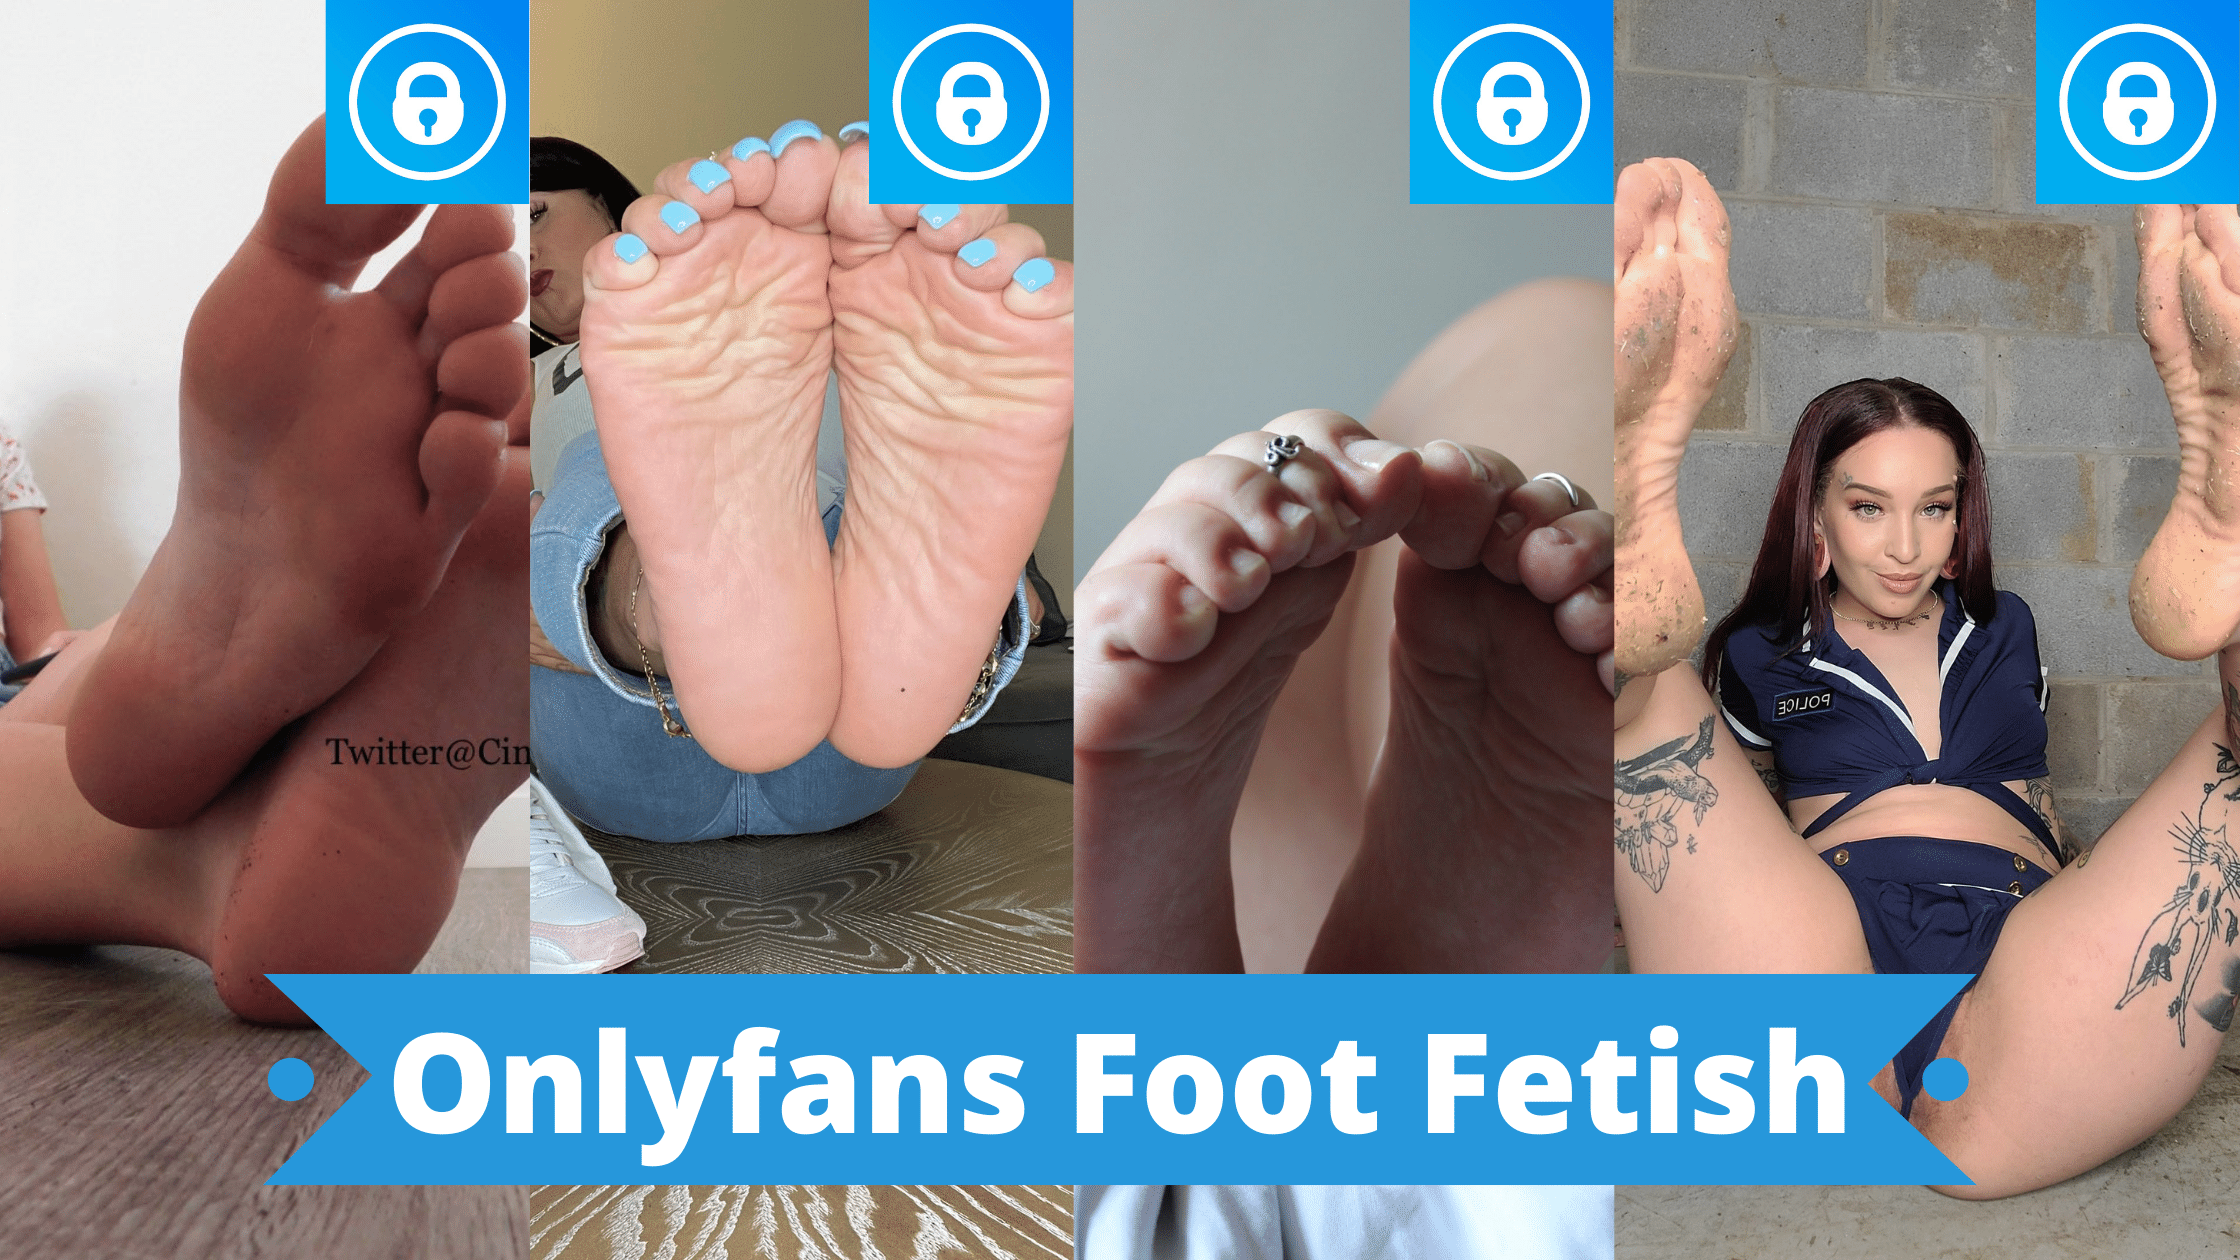 How much do feet models get paid on onlyfans